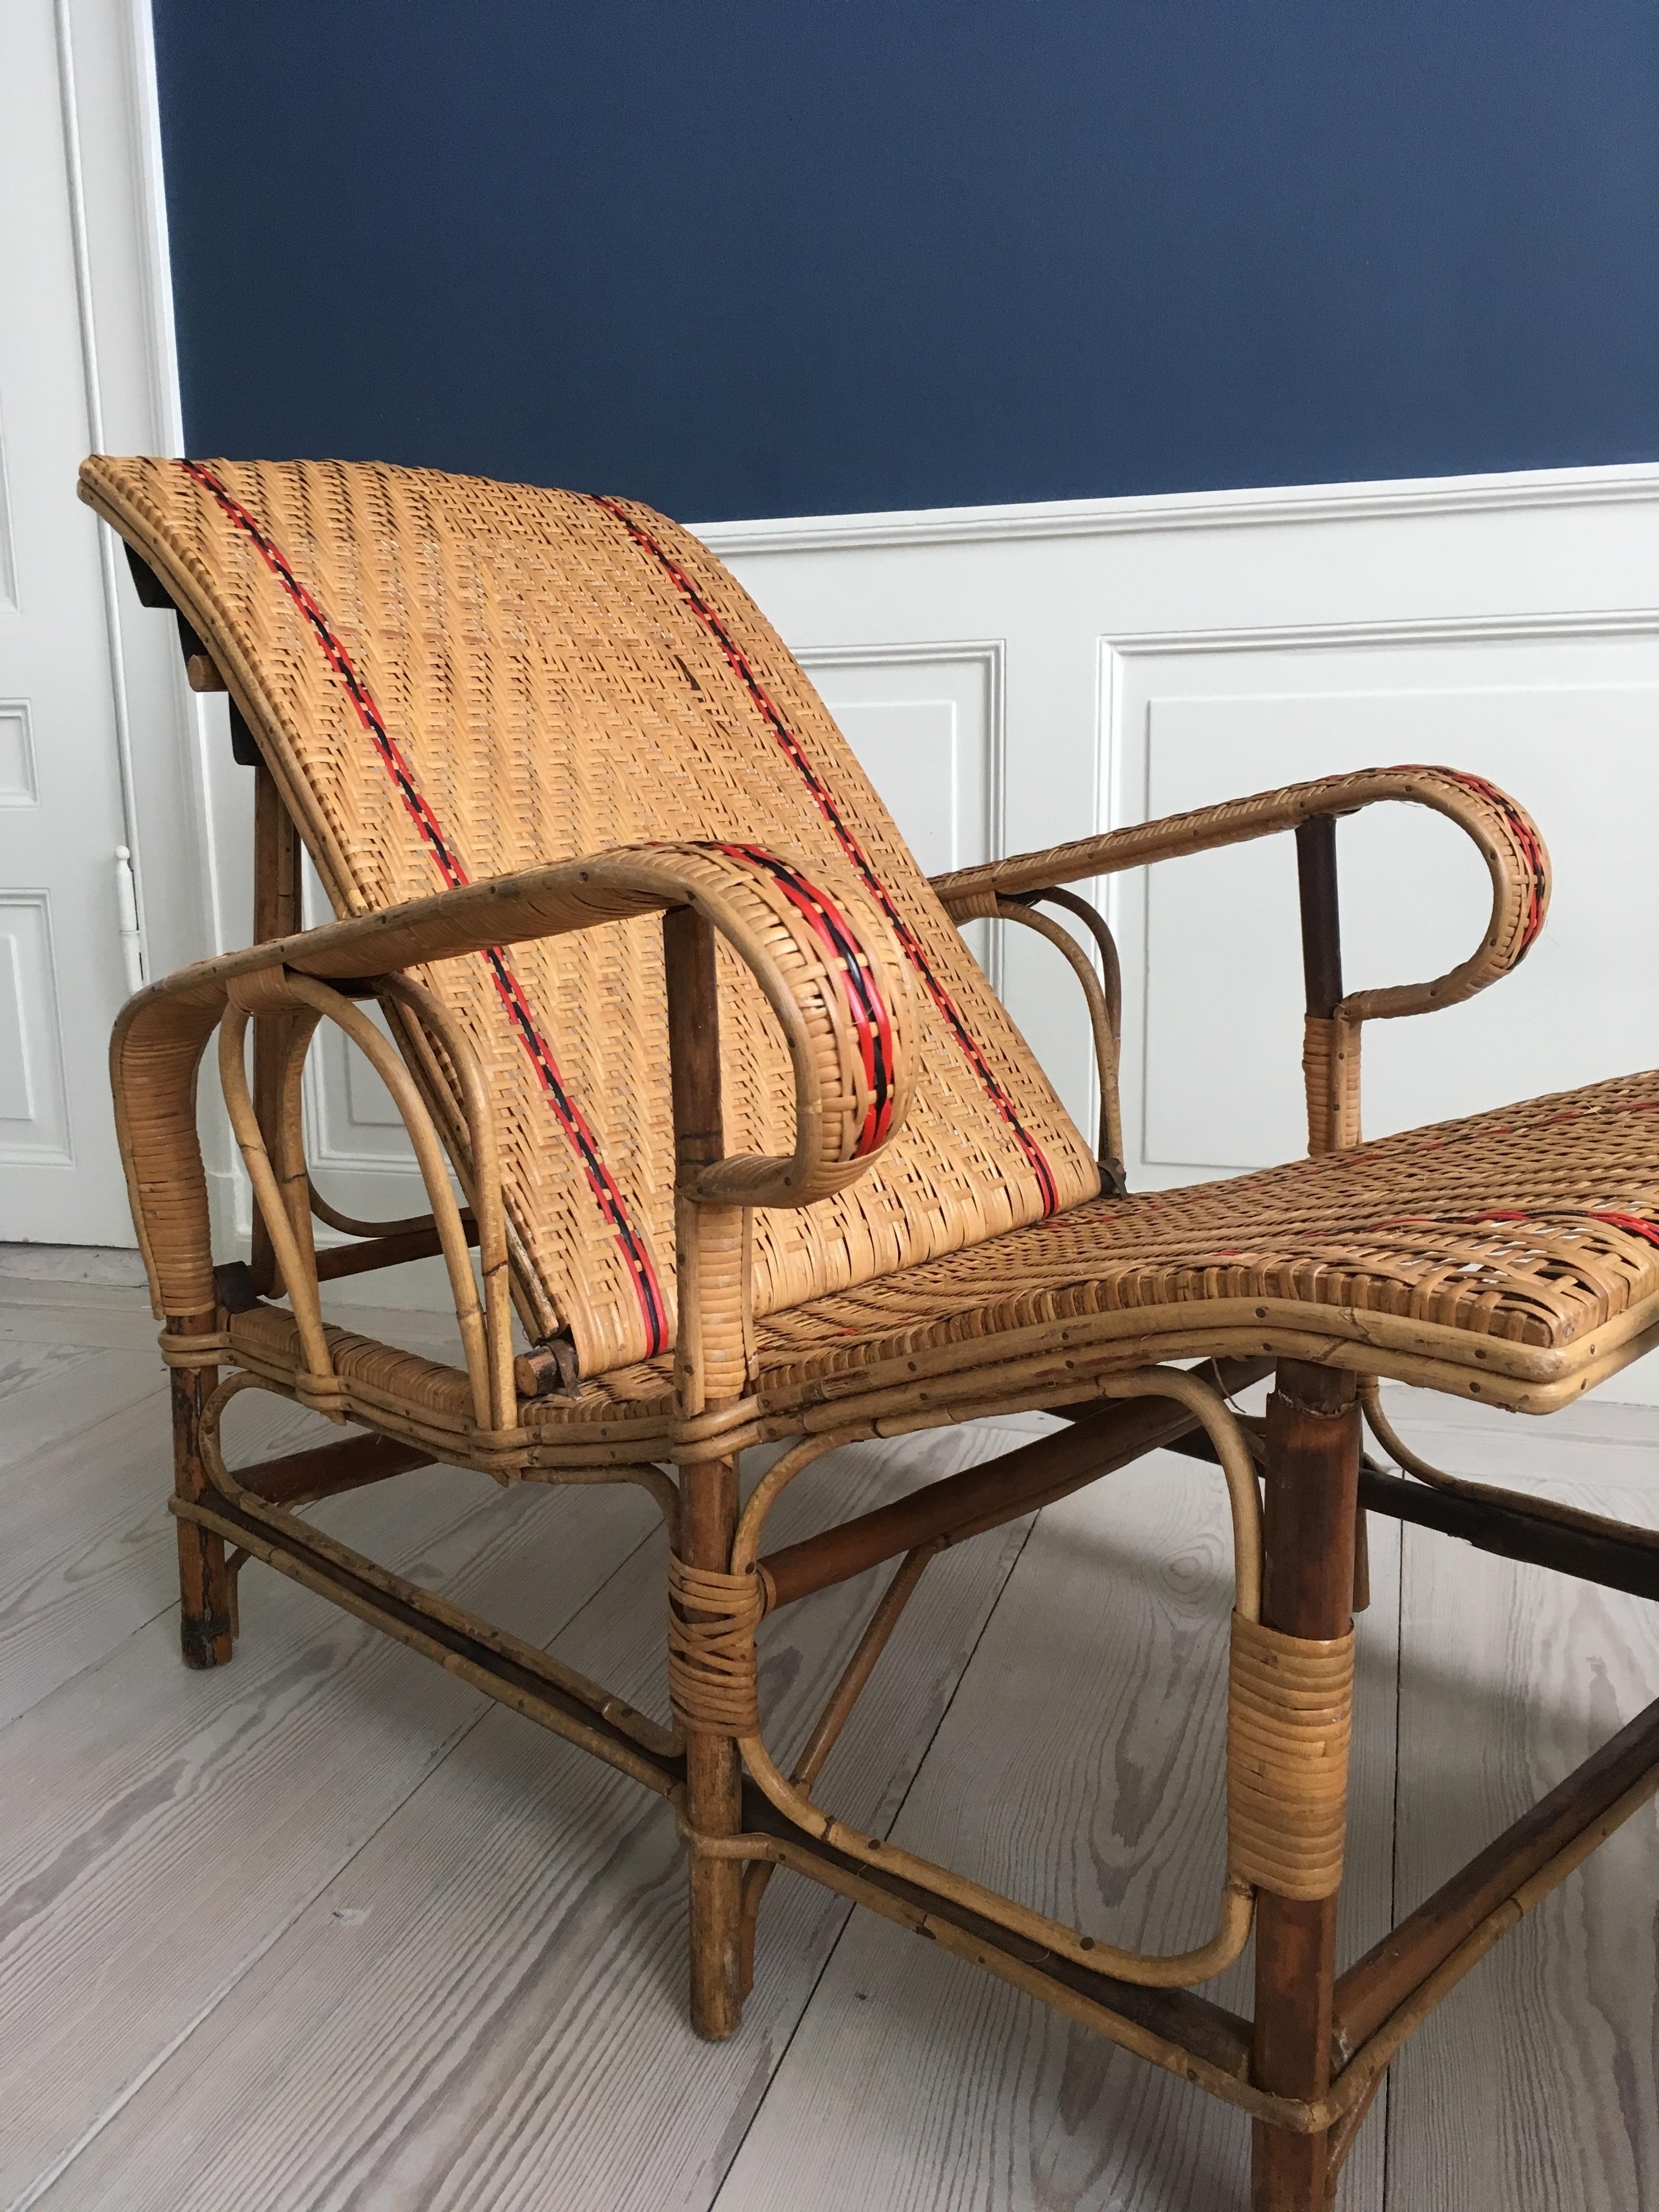 Woven Vintage Adjustable Rattan Armchair and Footrest, France, 1930s